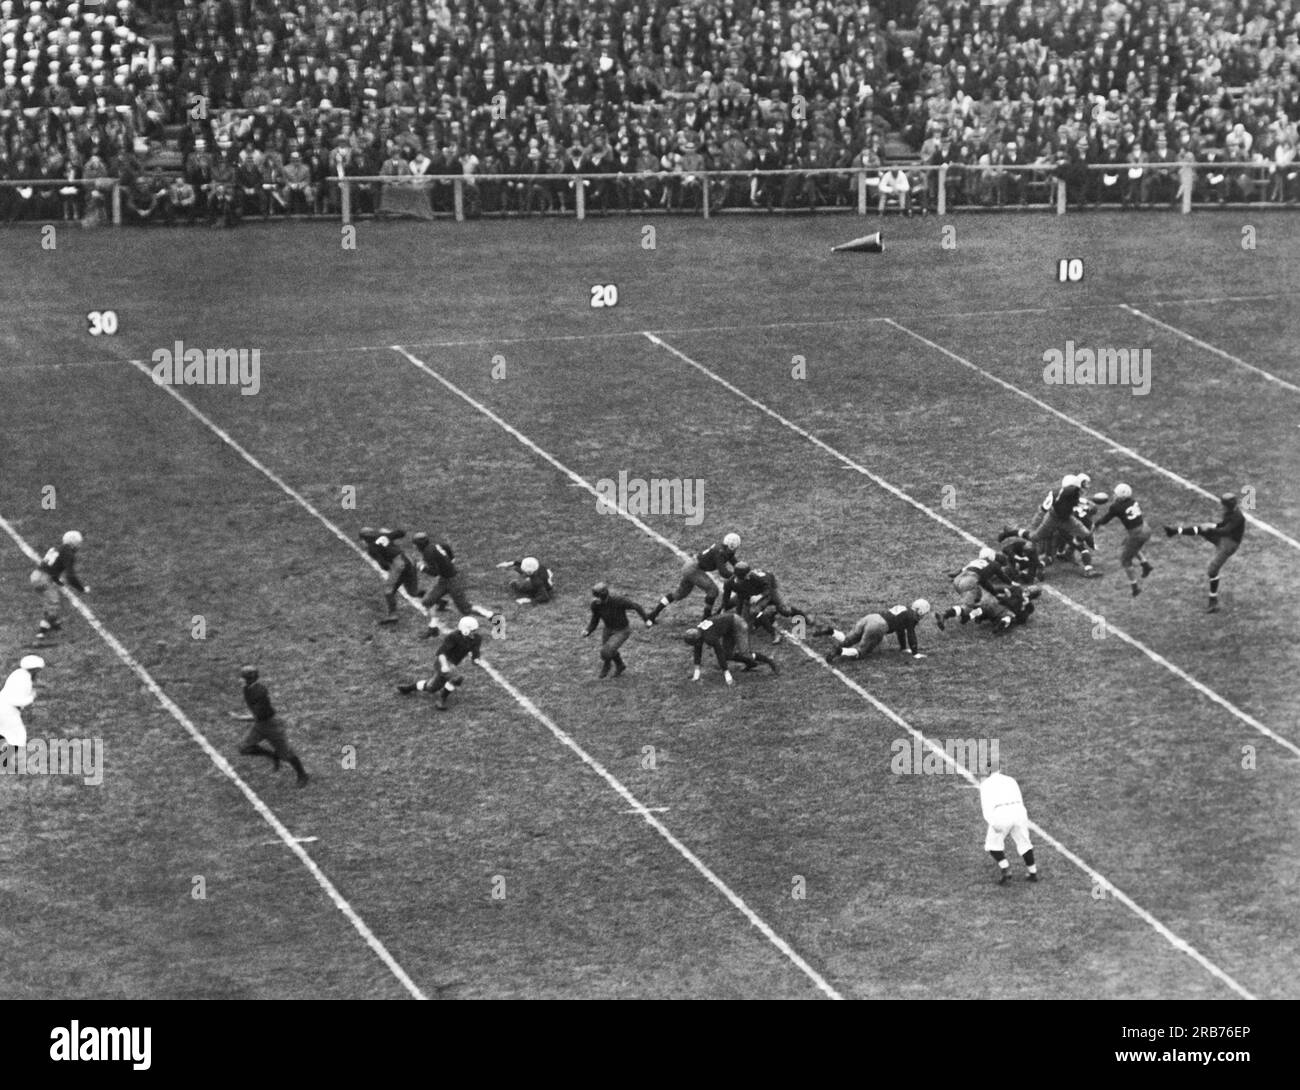 New Haven, Connecticut:    November 11, 1930 Harvard blocks Yale's Albie Booth's kick in the annual Harvard-Yale football game. Harvard Crimson won the game, 13 to 0. Stock Photo